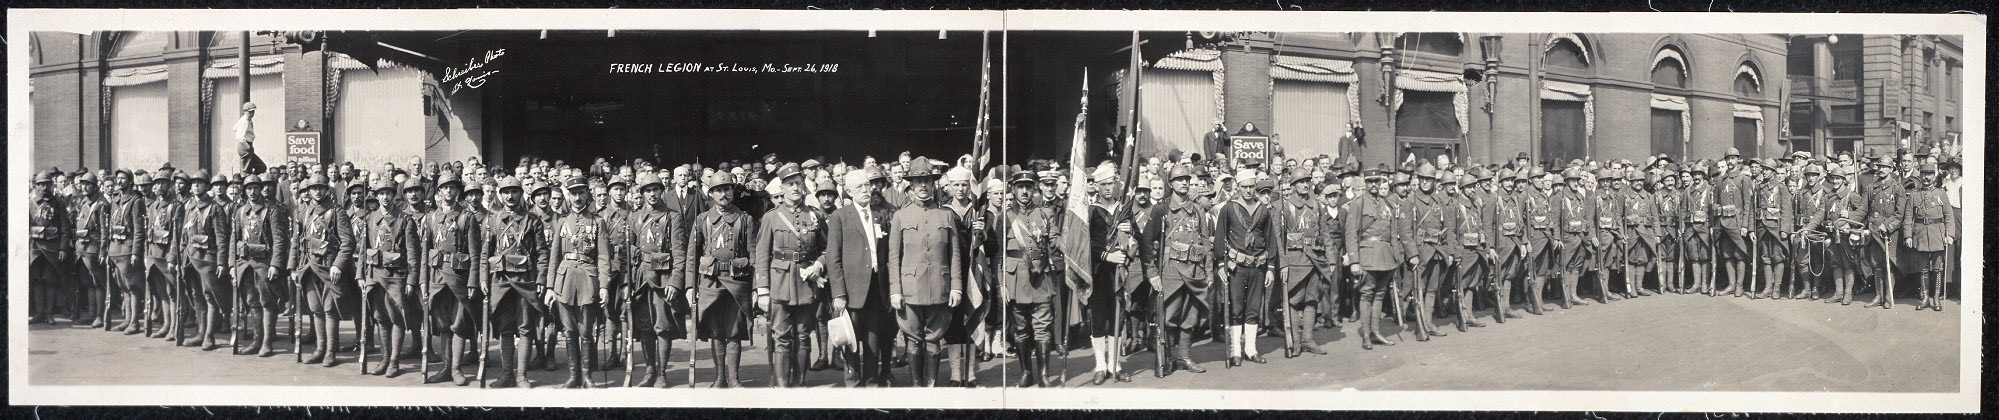 French Legion at St. Louis, Mo., Sept. 26, 1918